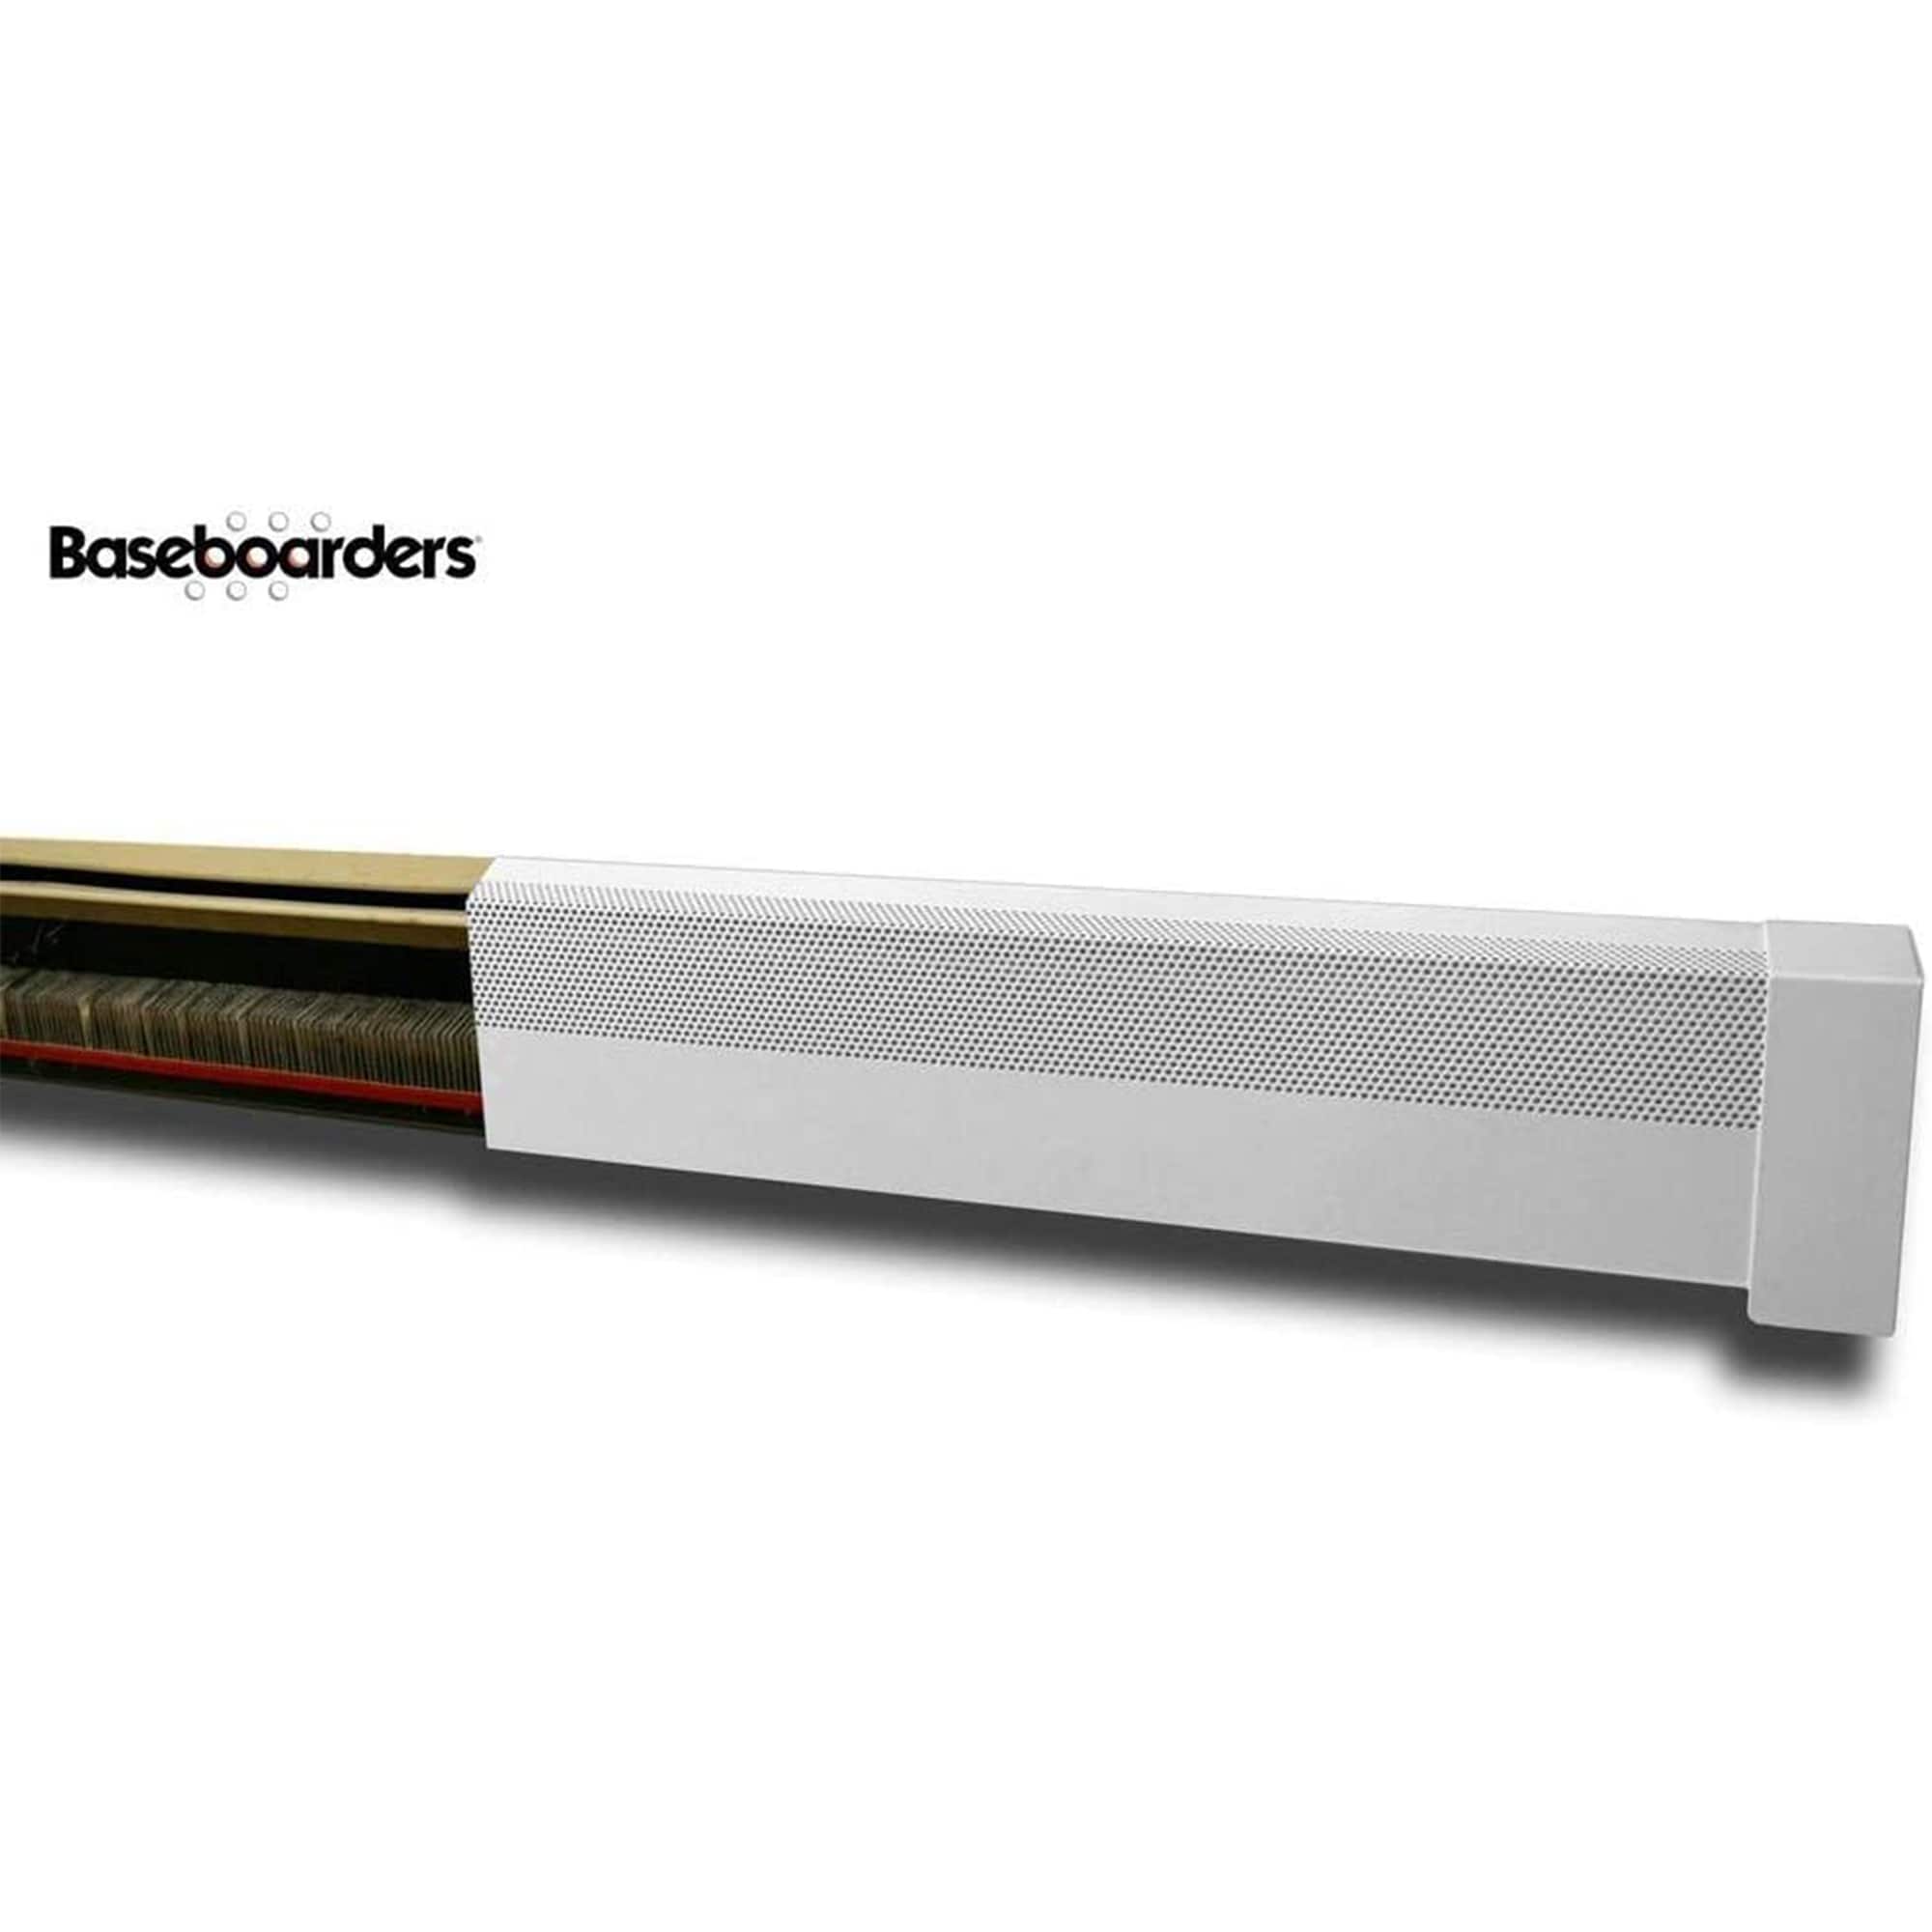 Baseboarders Electric Baseboard Heater Cover 6 ft. Galvanized Steel Slip-On Panel with Endcaps - Pack